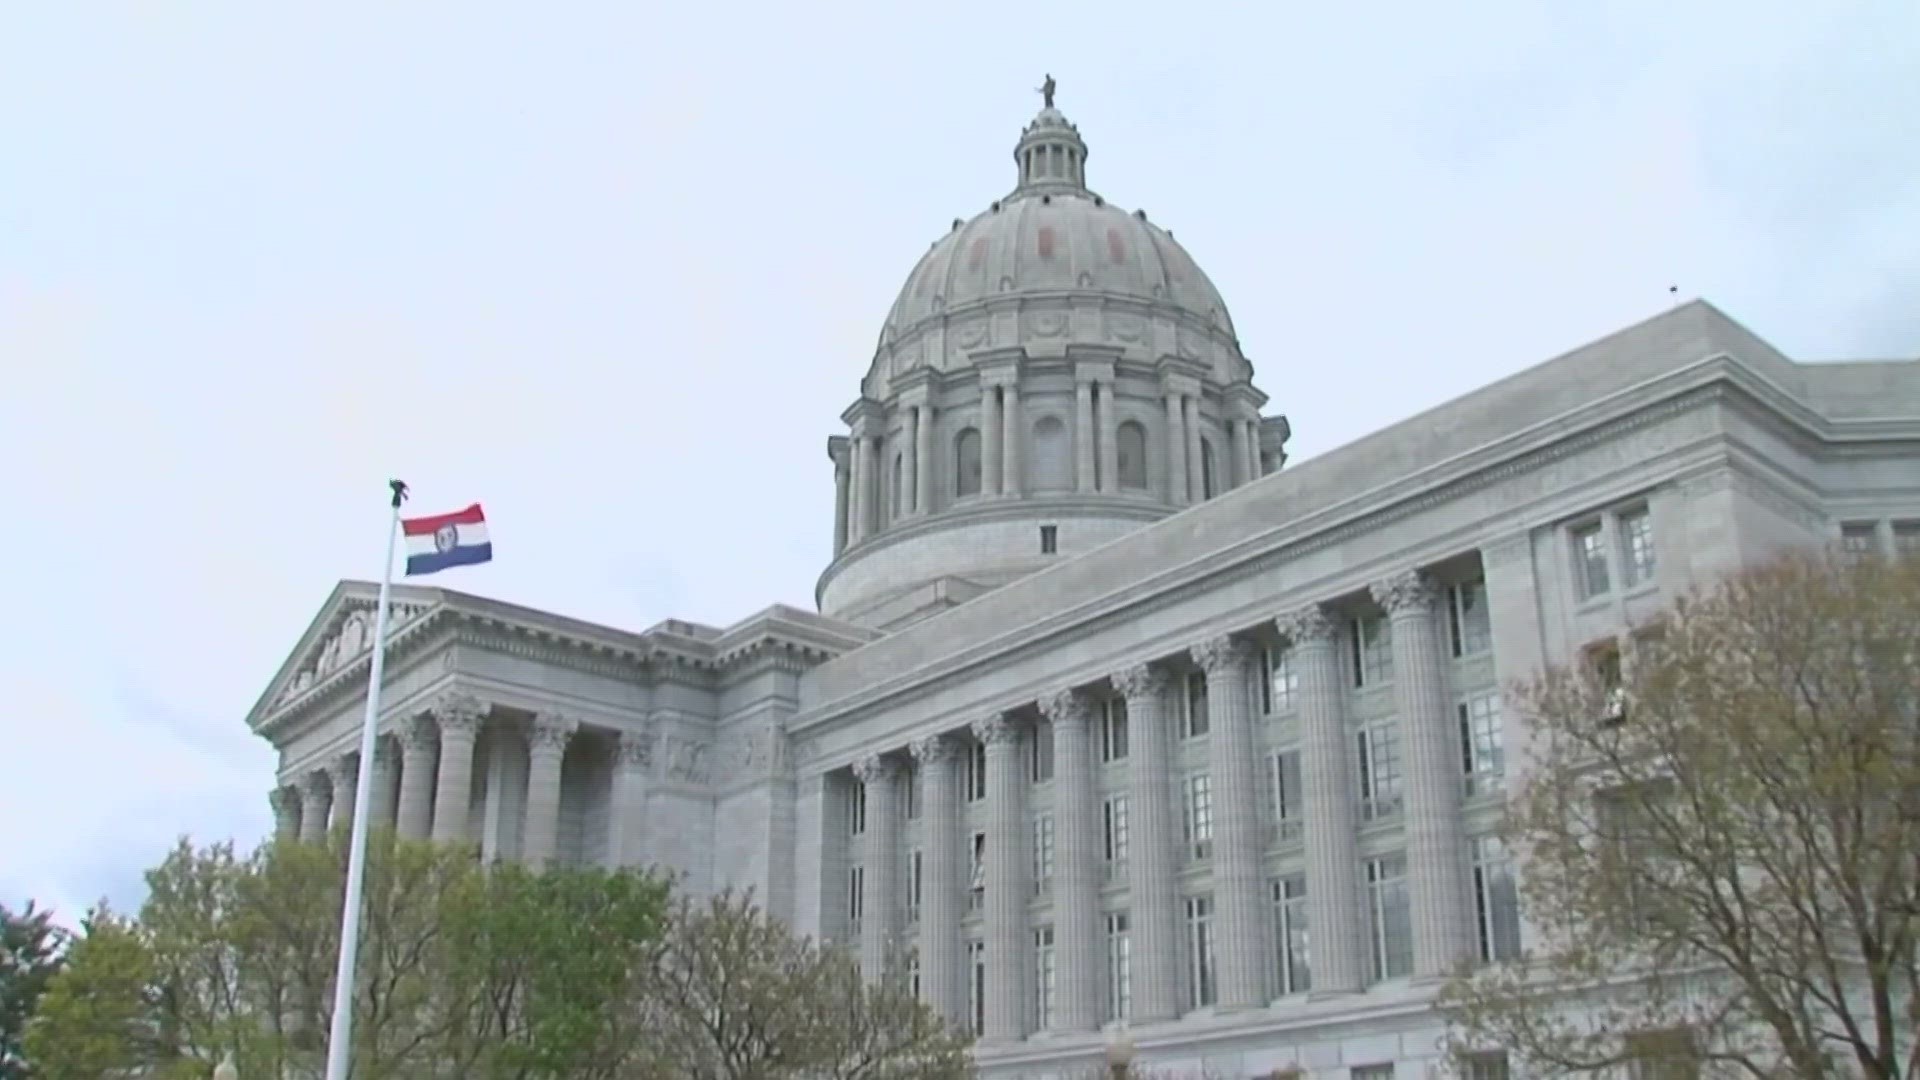 Missouri Attorney General spokeswoman Madeline Sieren clarified in a statement later in the day that adults also would be covered by the new rule.